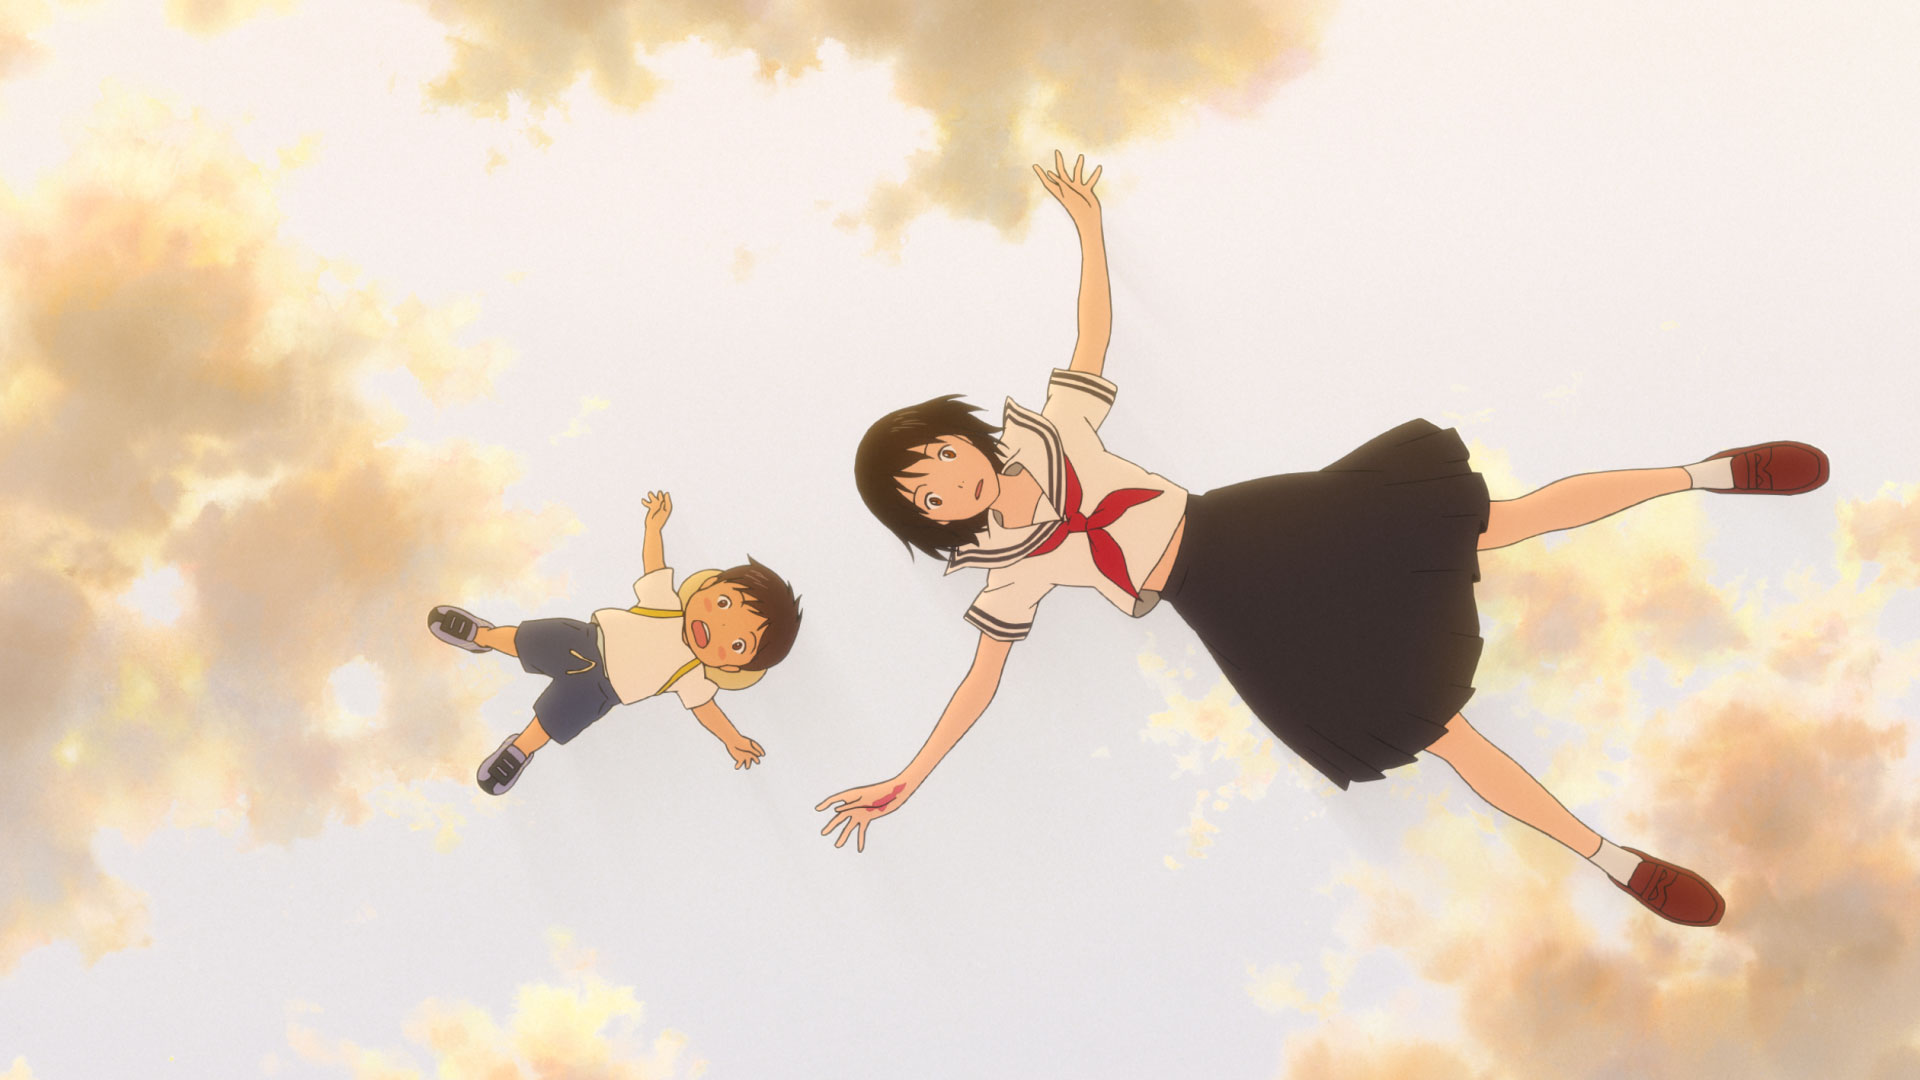 Kun and Mirai in Mirai, one of the best family movies on Netflix